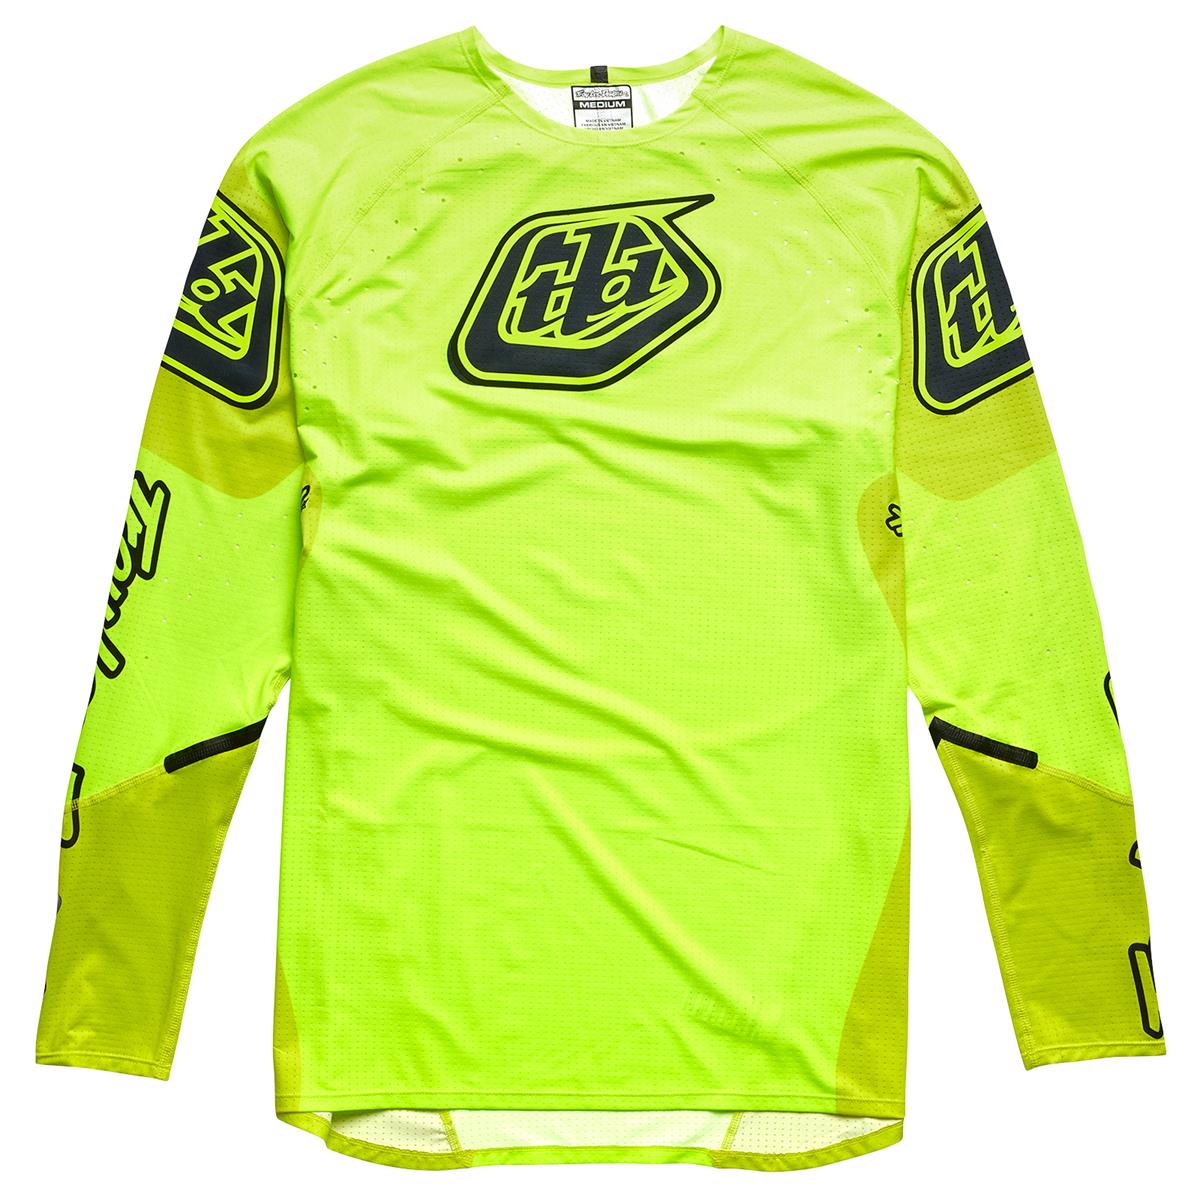 Troy Lee Designs MTB Jersey Long Sleeve Sprint Ultra Sequence - Flo Yellow